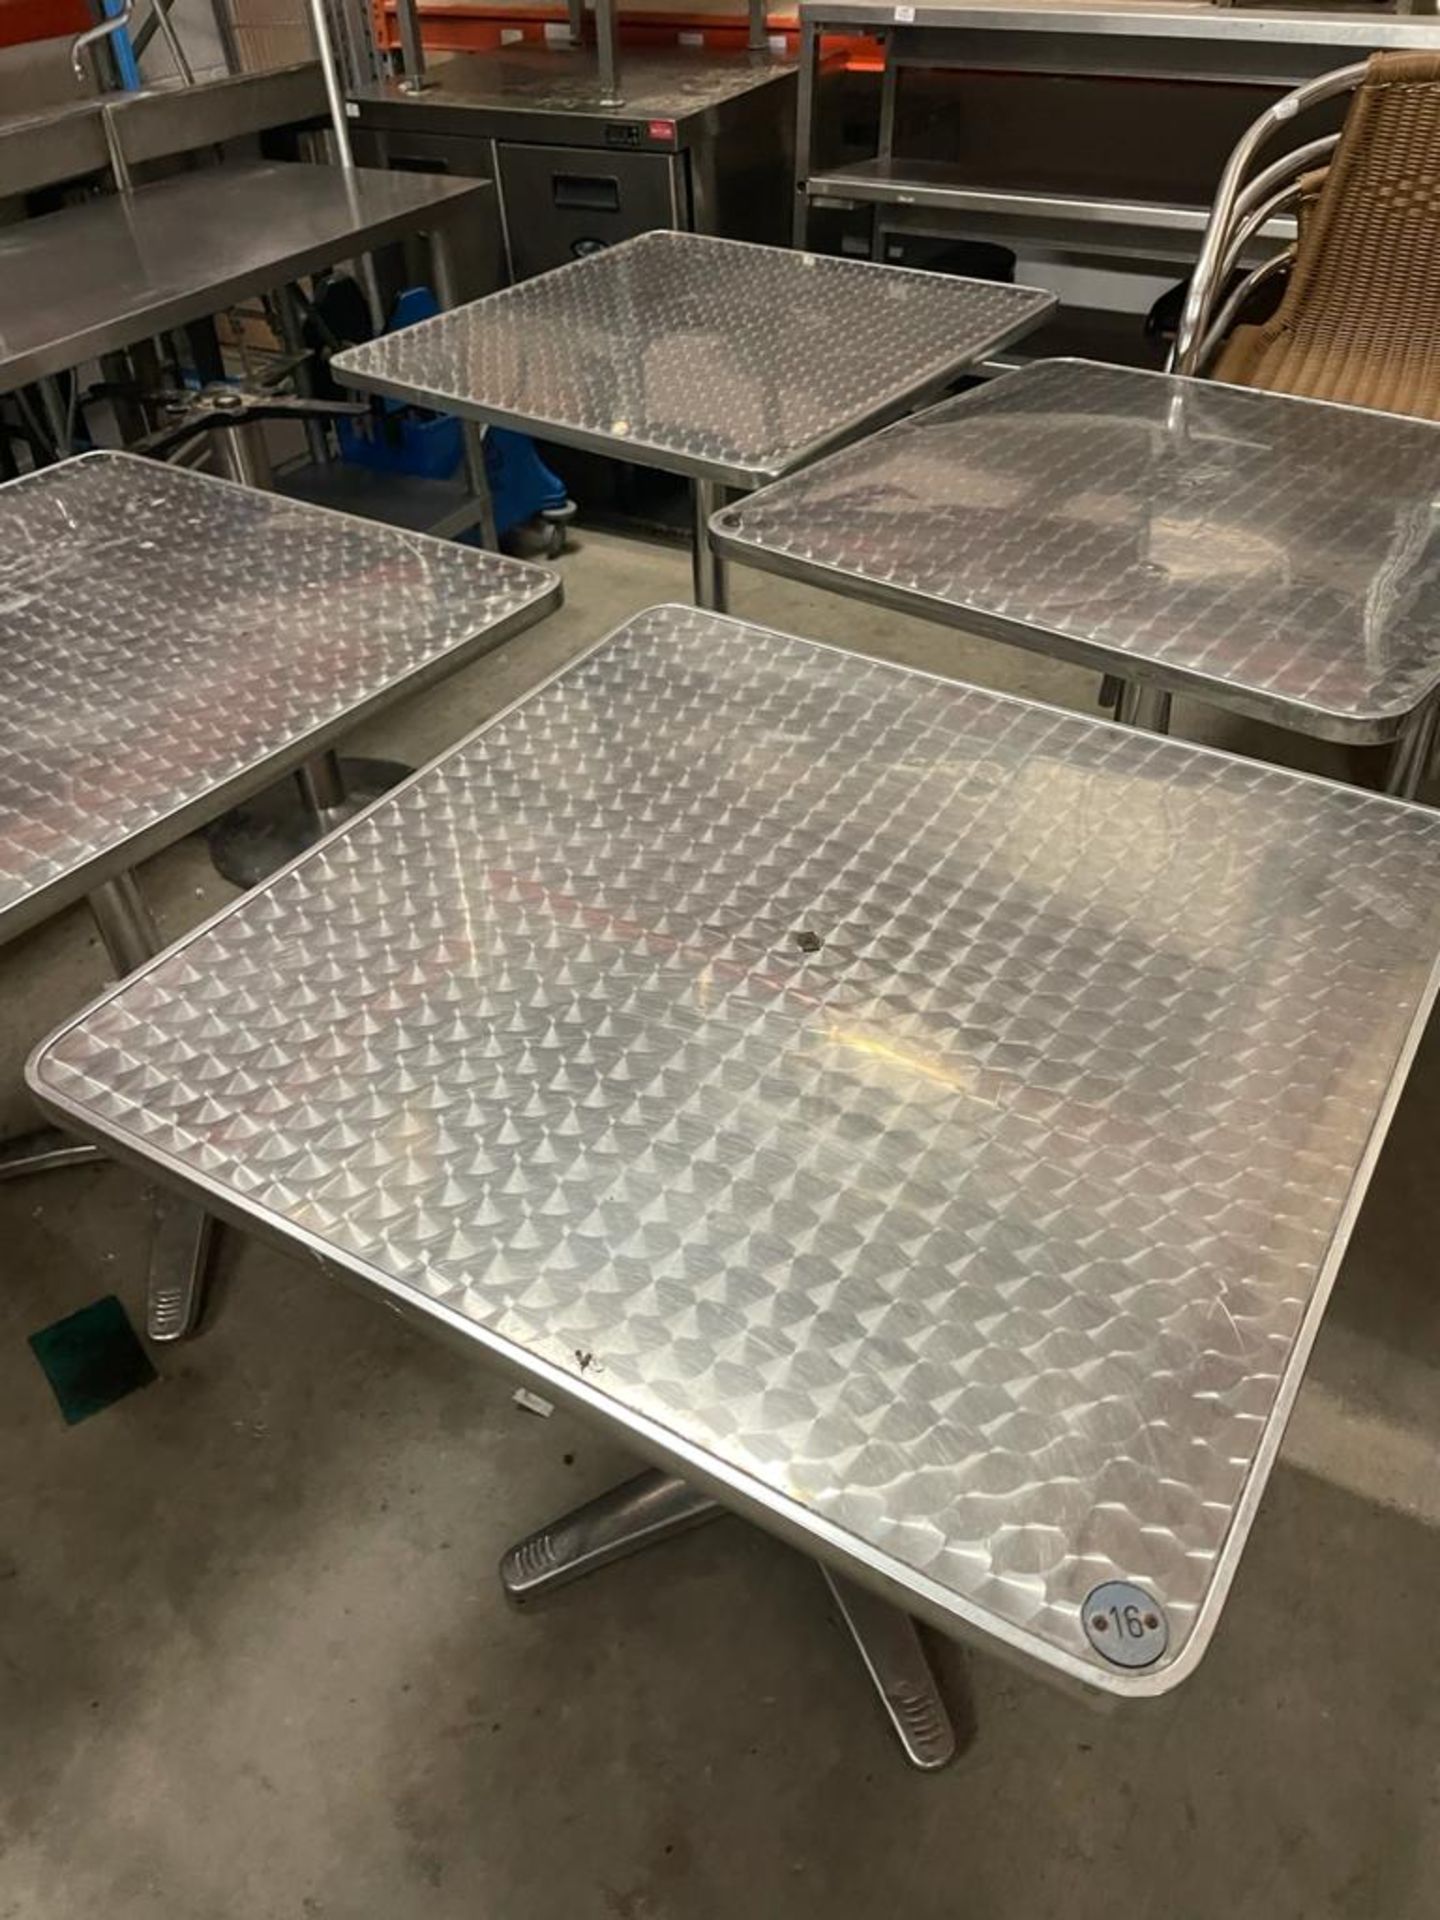 *4 x brushed metal outside tables and bases. 800w x 800d x 730h